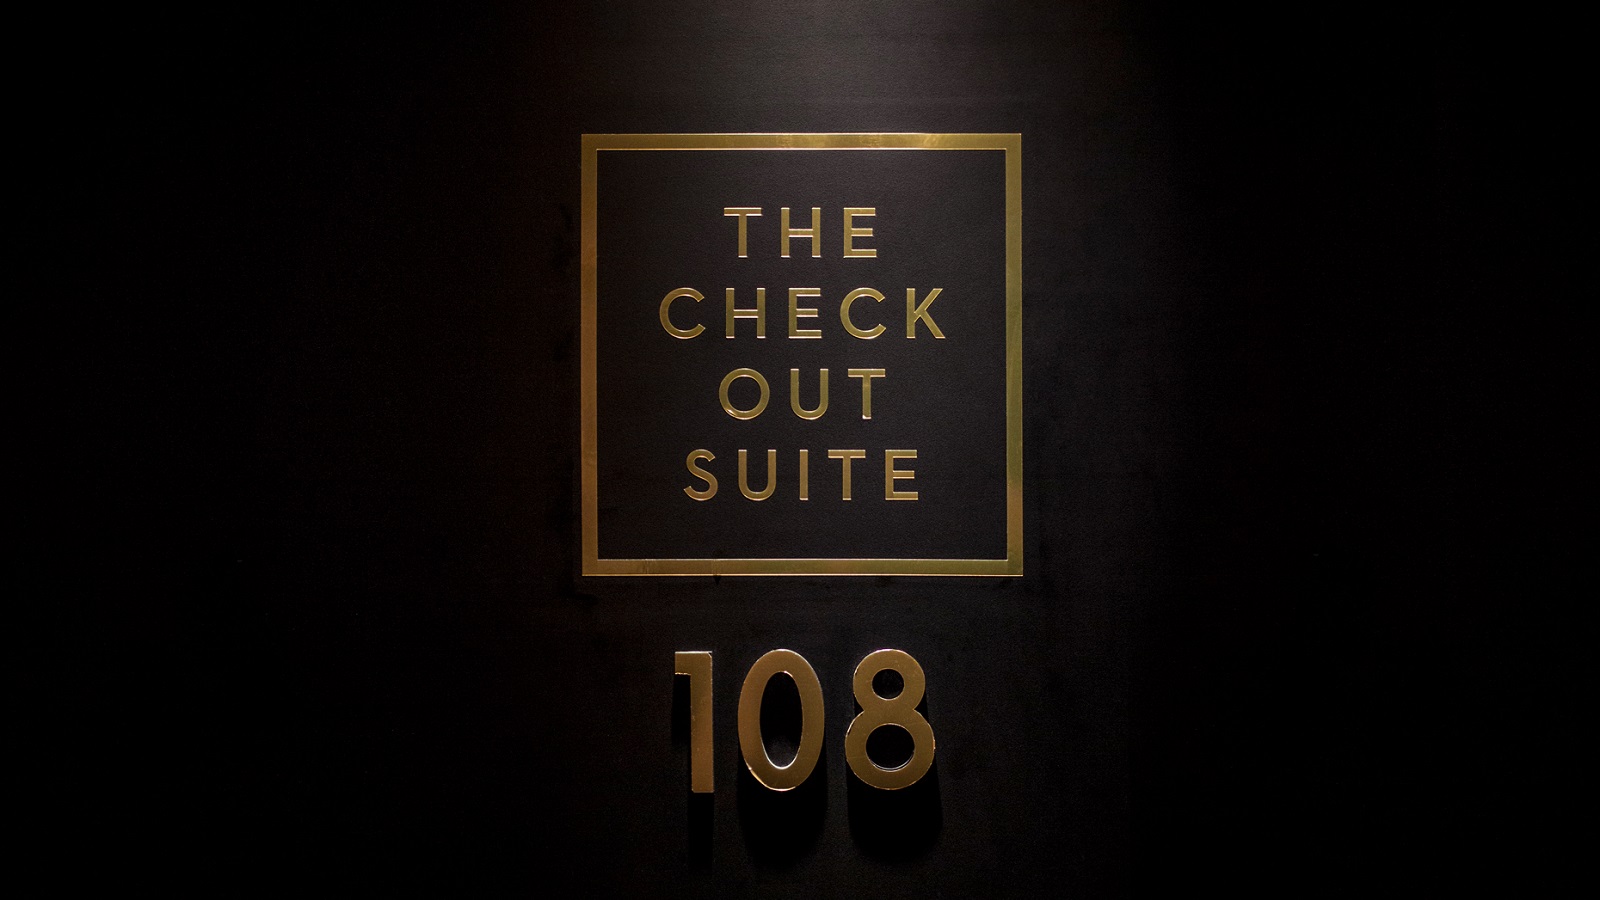 #TBT: You Don’t Have to Be Rich to Pay for the Check Out Suite